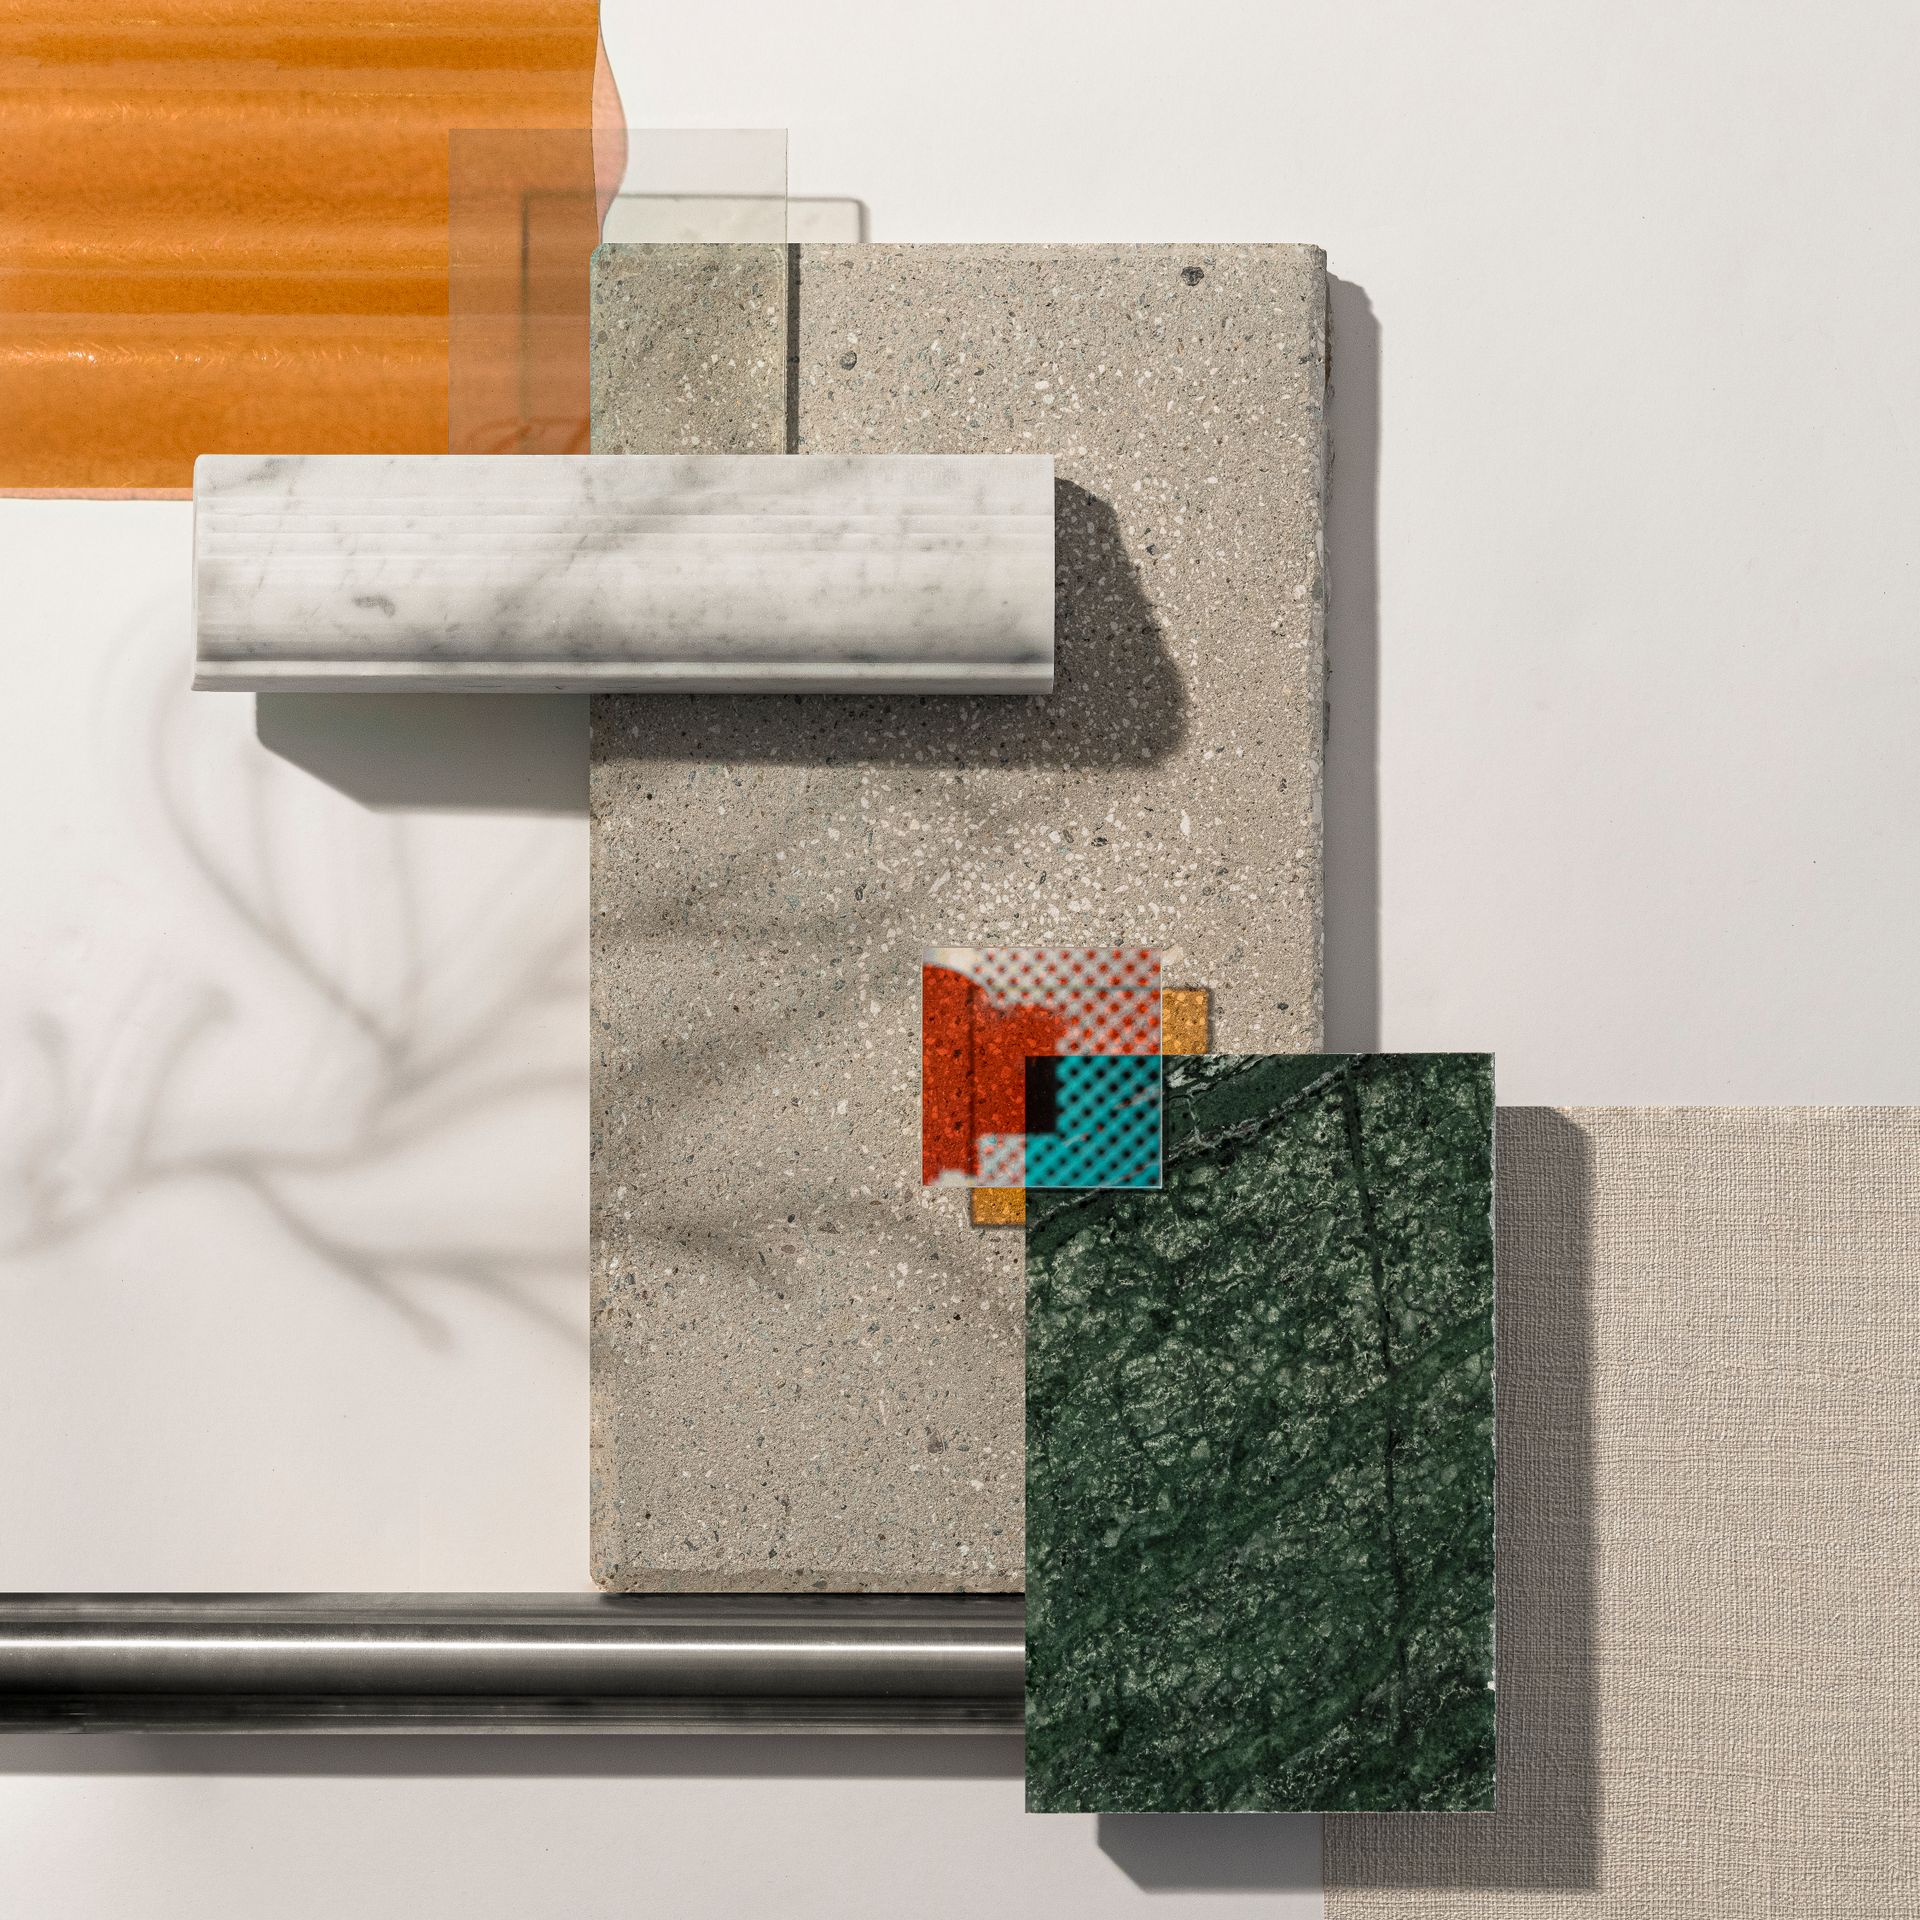 Still life photos materials composition concrete, marble, wood, laminate, glass, tiles, clay. Officina Magisafi architecture design - composition 5